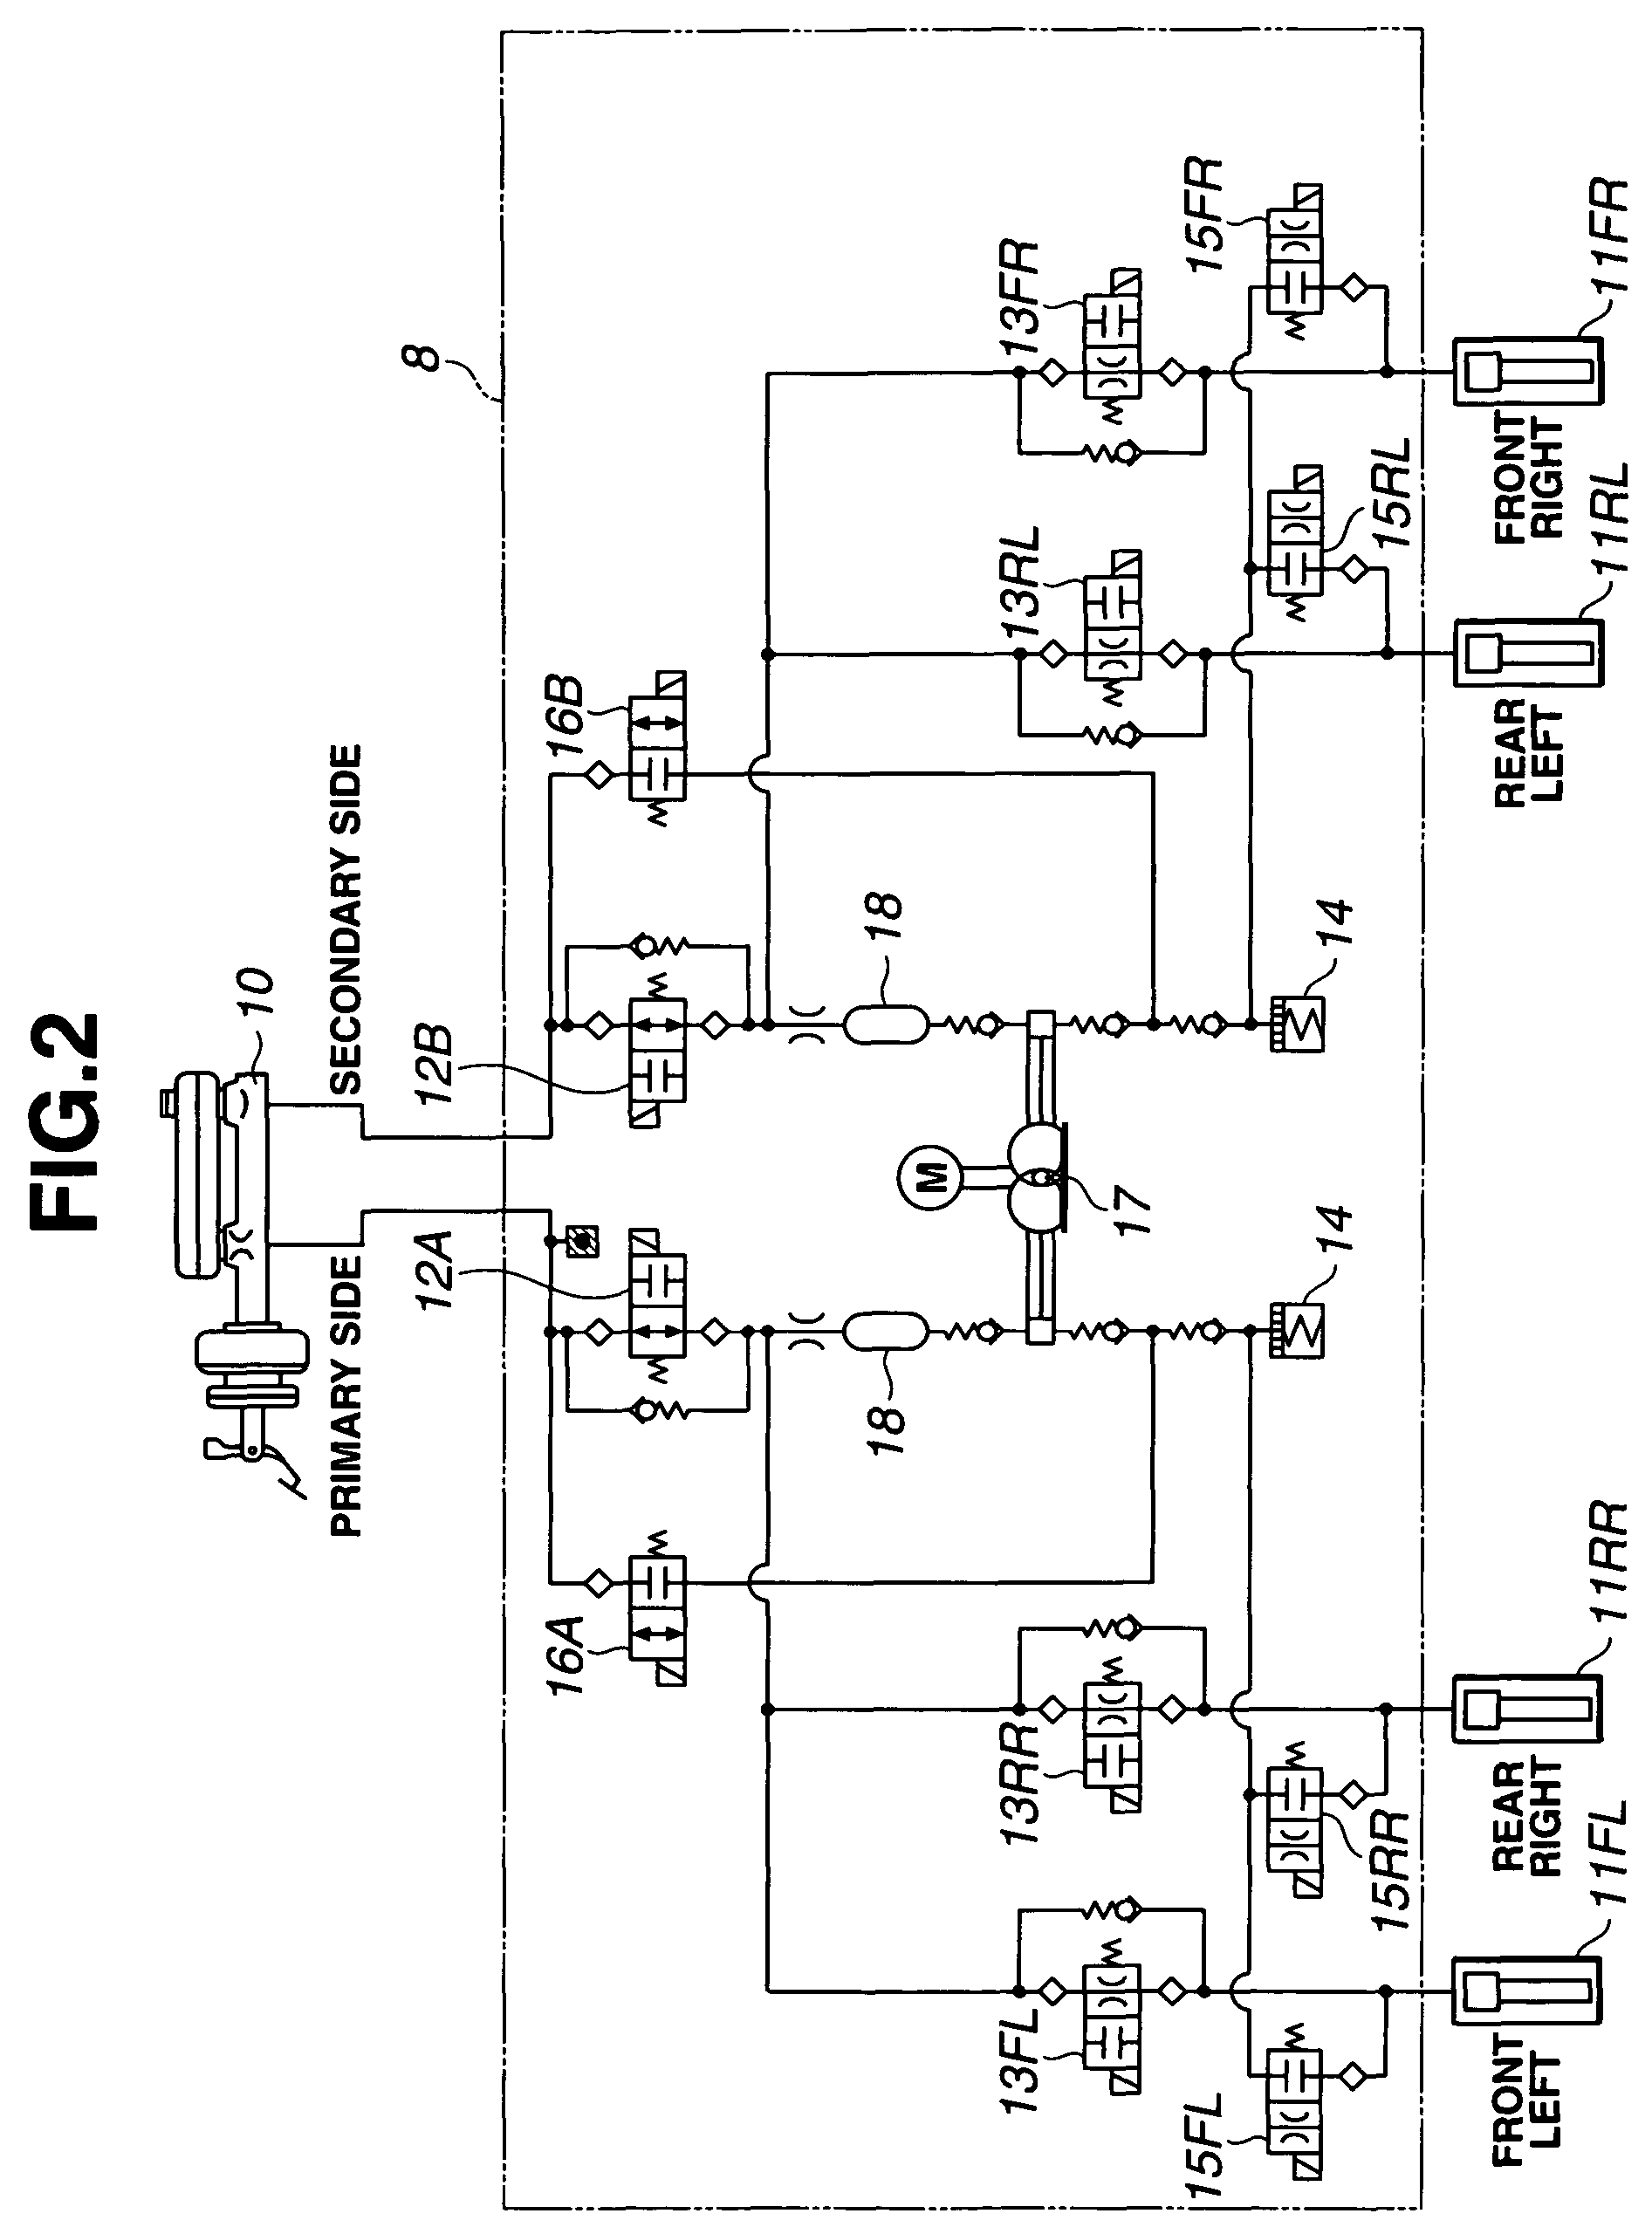 Vehicular turning control apparatus and method